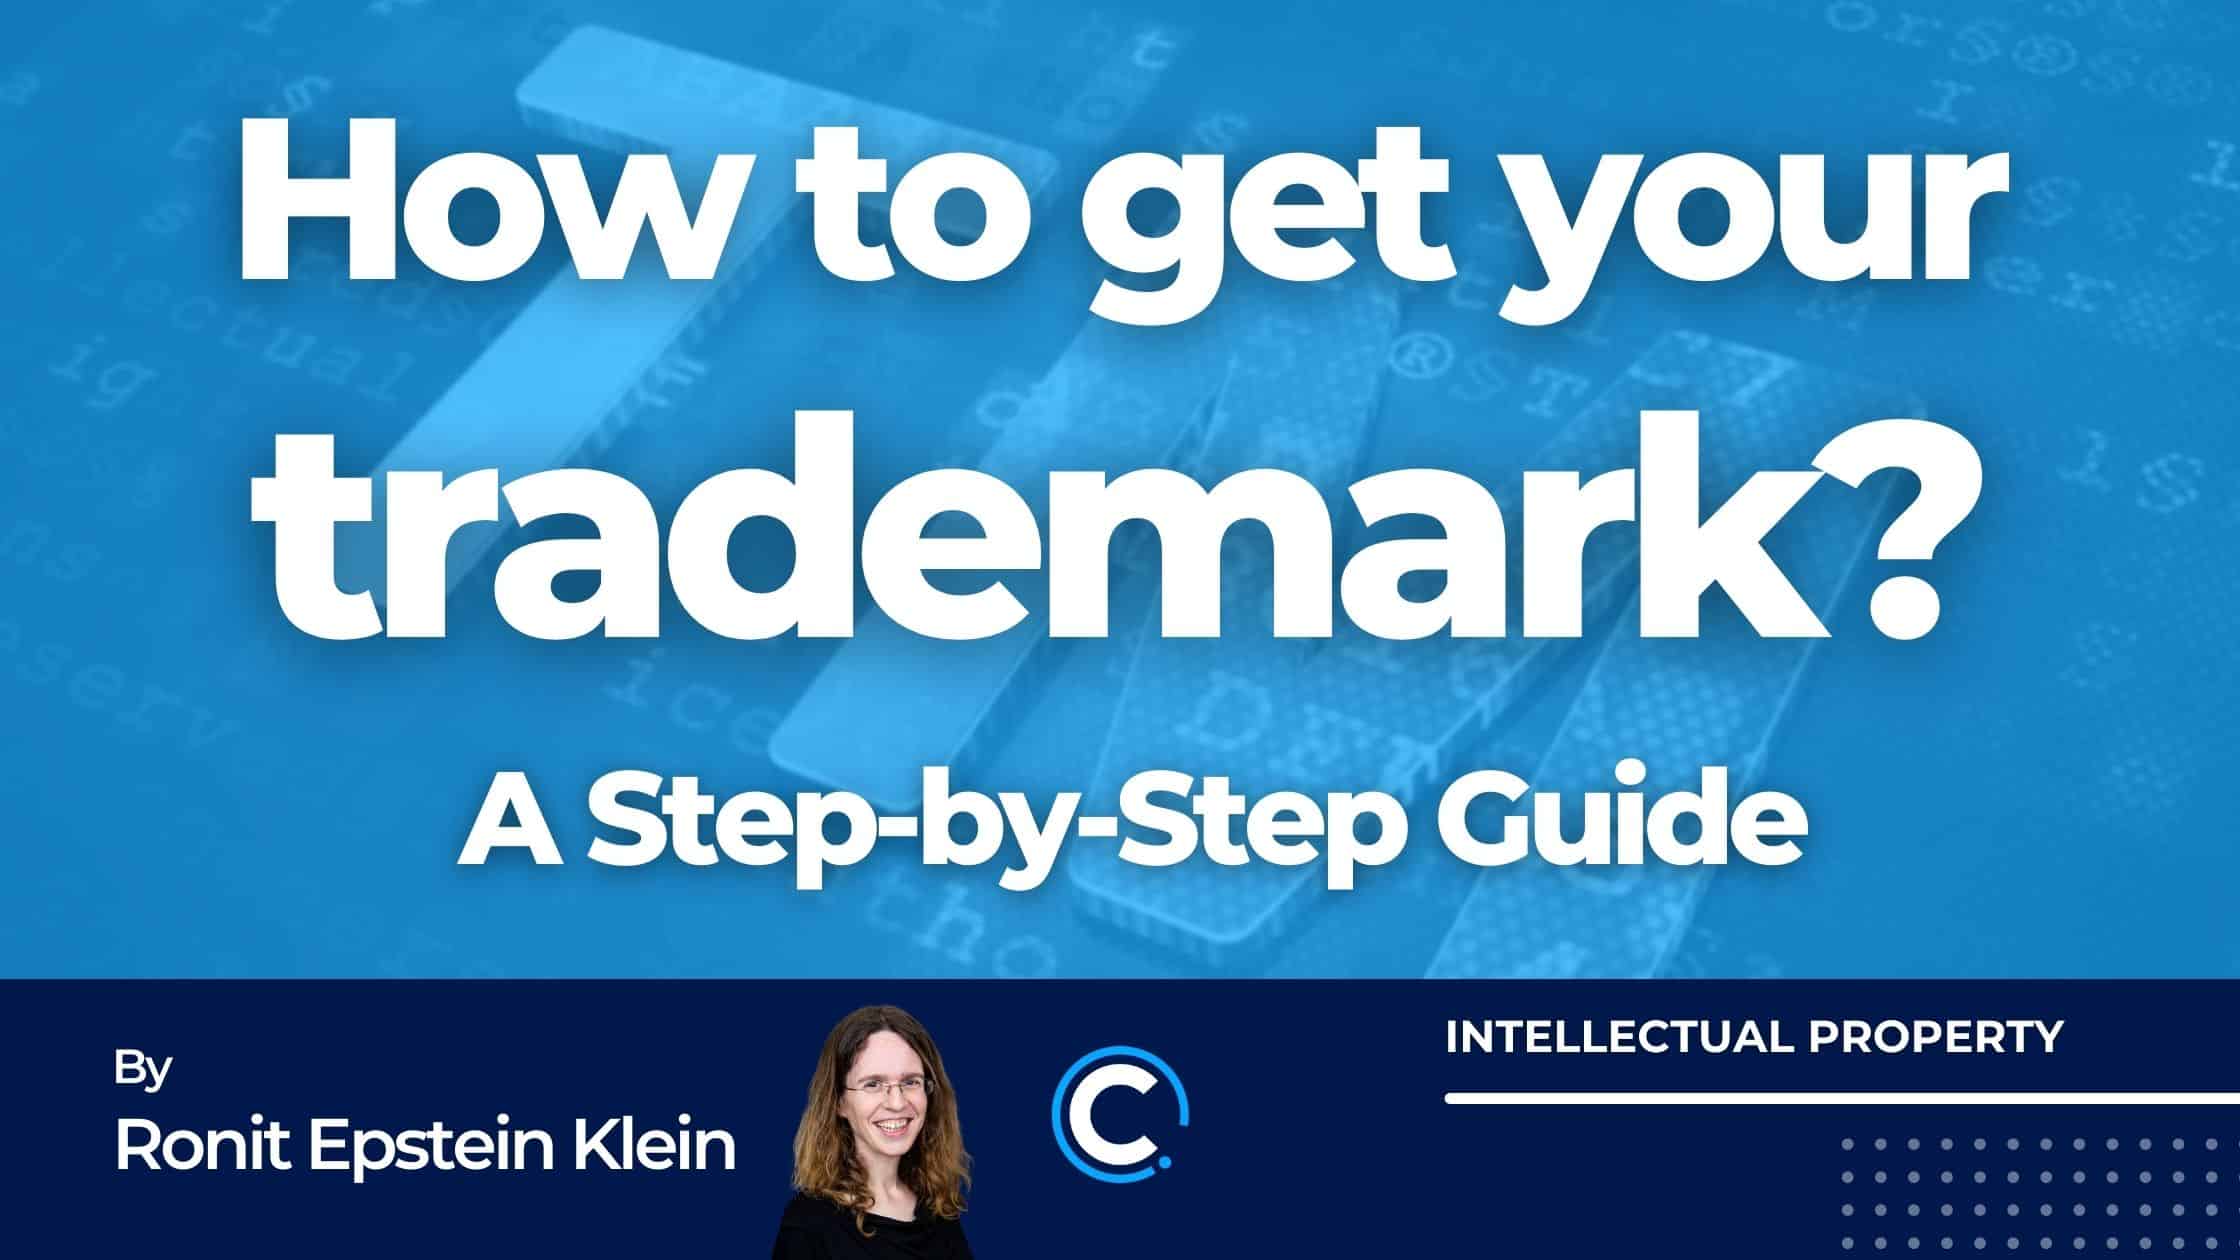 How to get a trademark - a step by step guide cabilly co